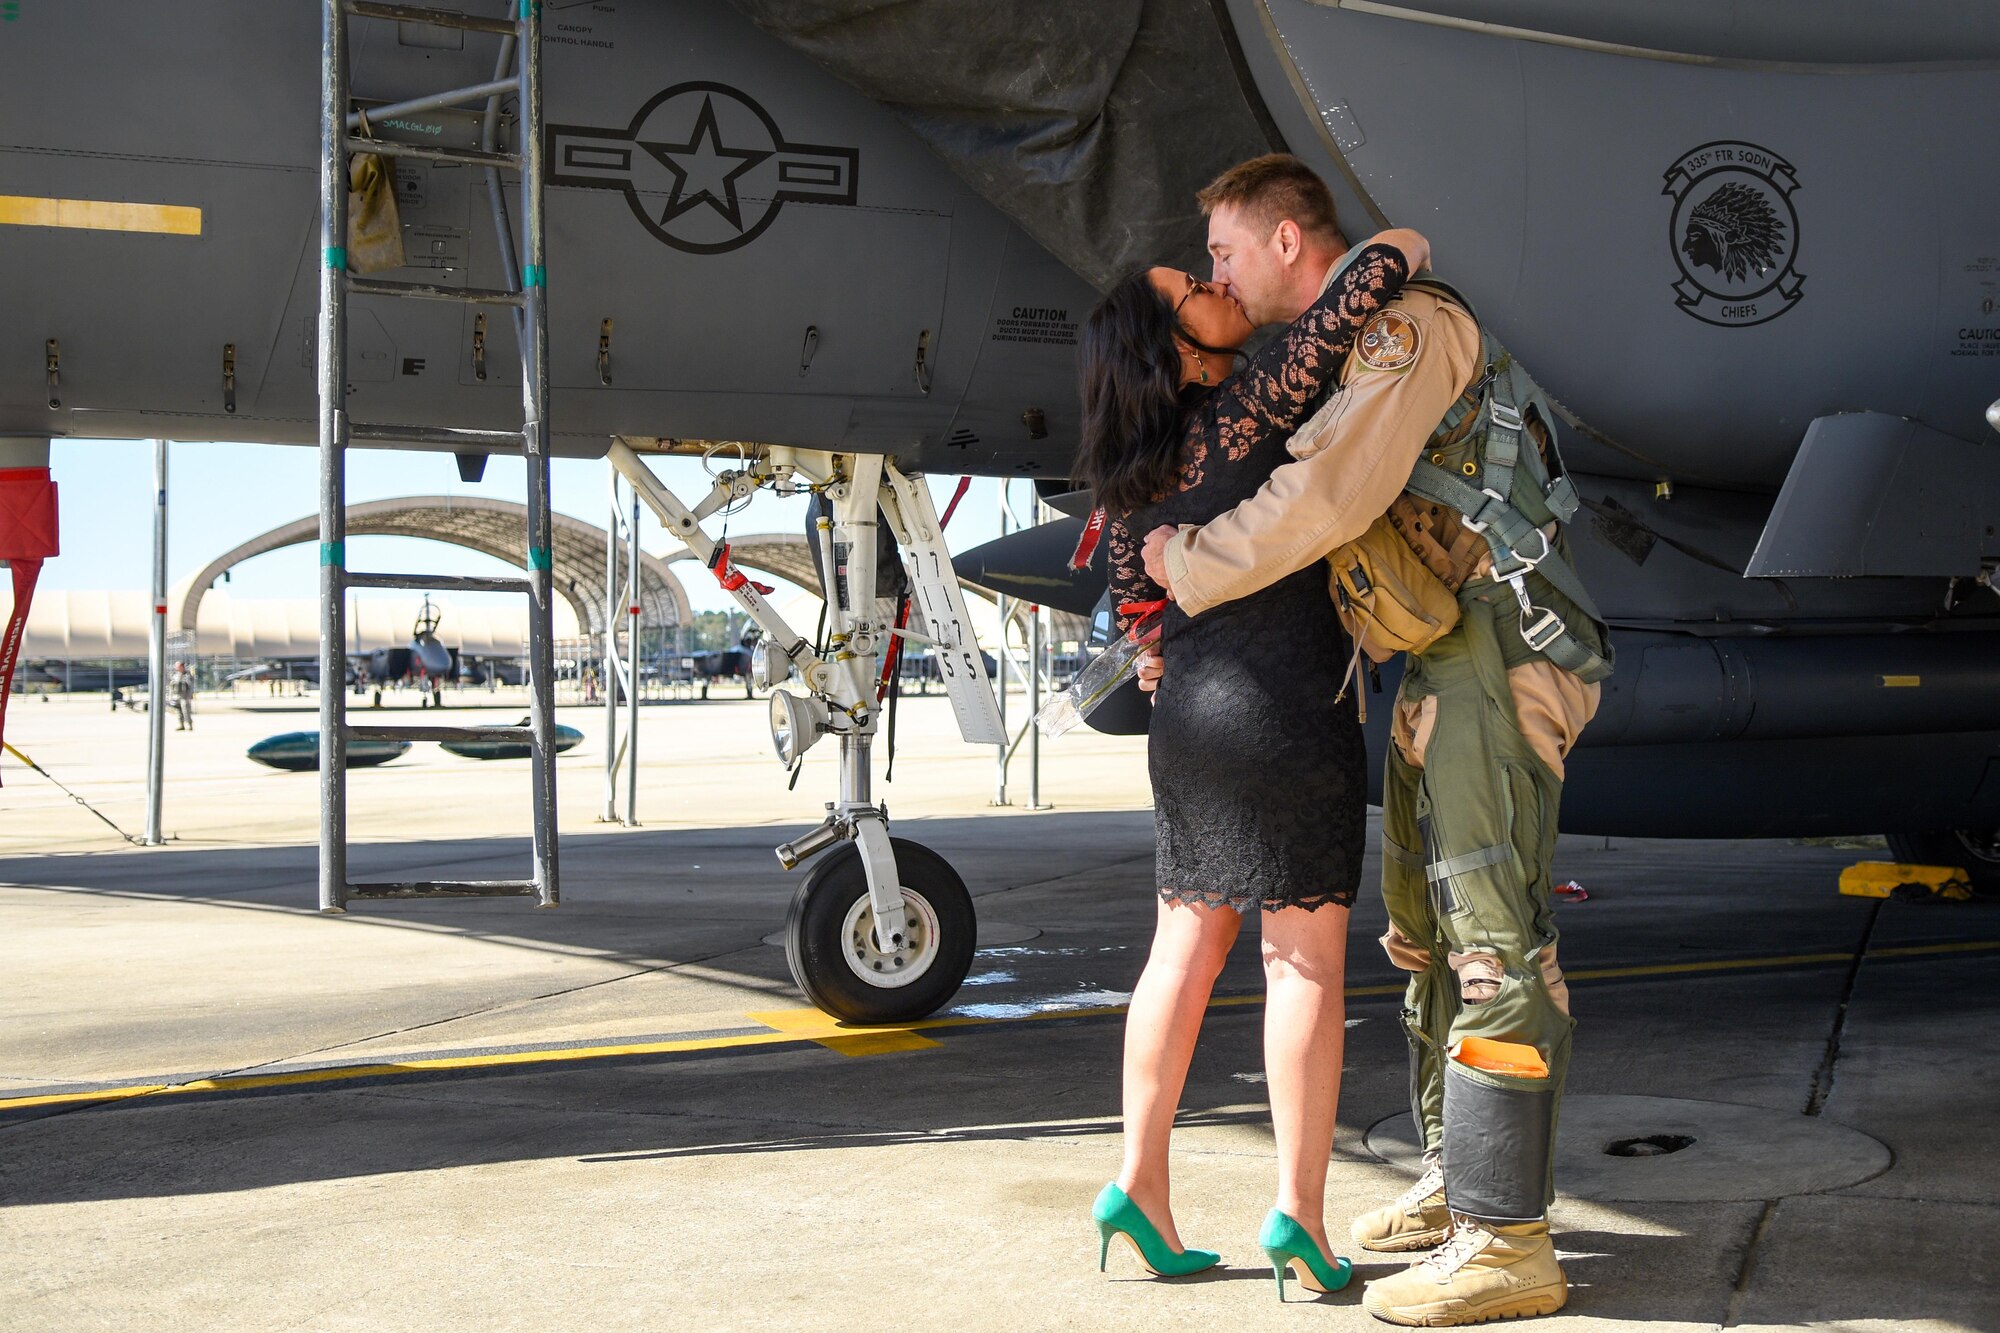 Capt. Bernard Froehlich (right), 335th Fighter Squadron weapons system officer, embraces his girlfriend Melissa Weinblatt, Oct. 12, 2016, at Seymour Johnson Air Force Base, North Carolina. After their embrace, Froehlich proposed to Weinblatt. (U.S. Air Force photo by Airman Shawna L. Keyes)